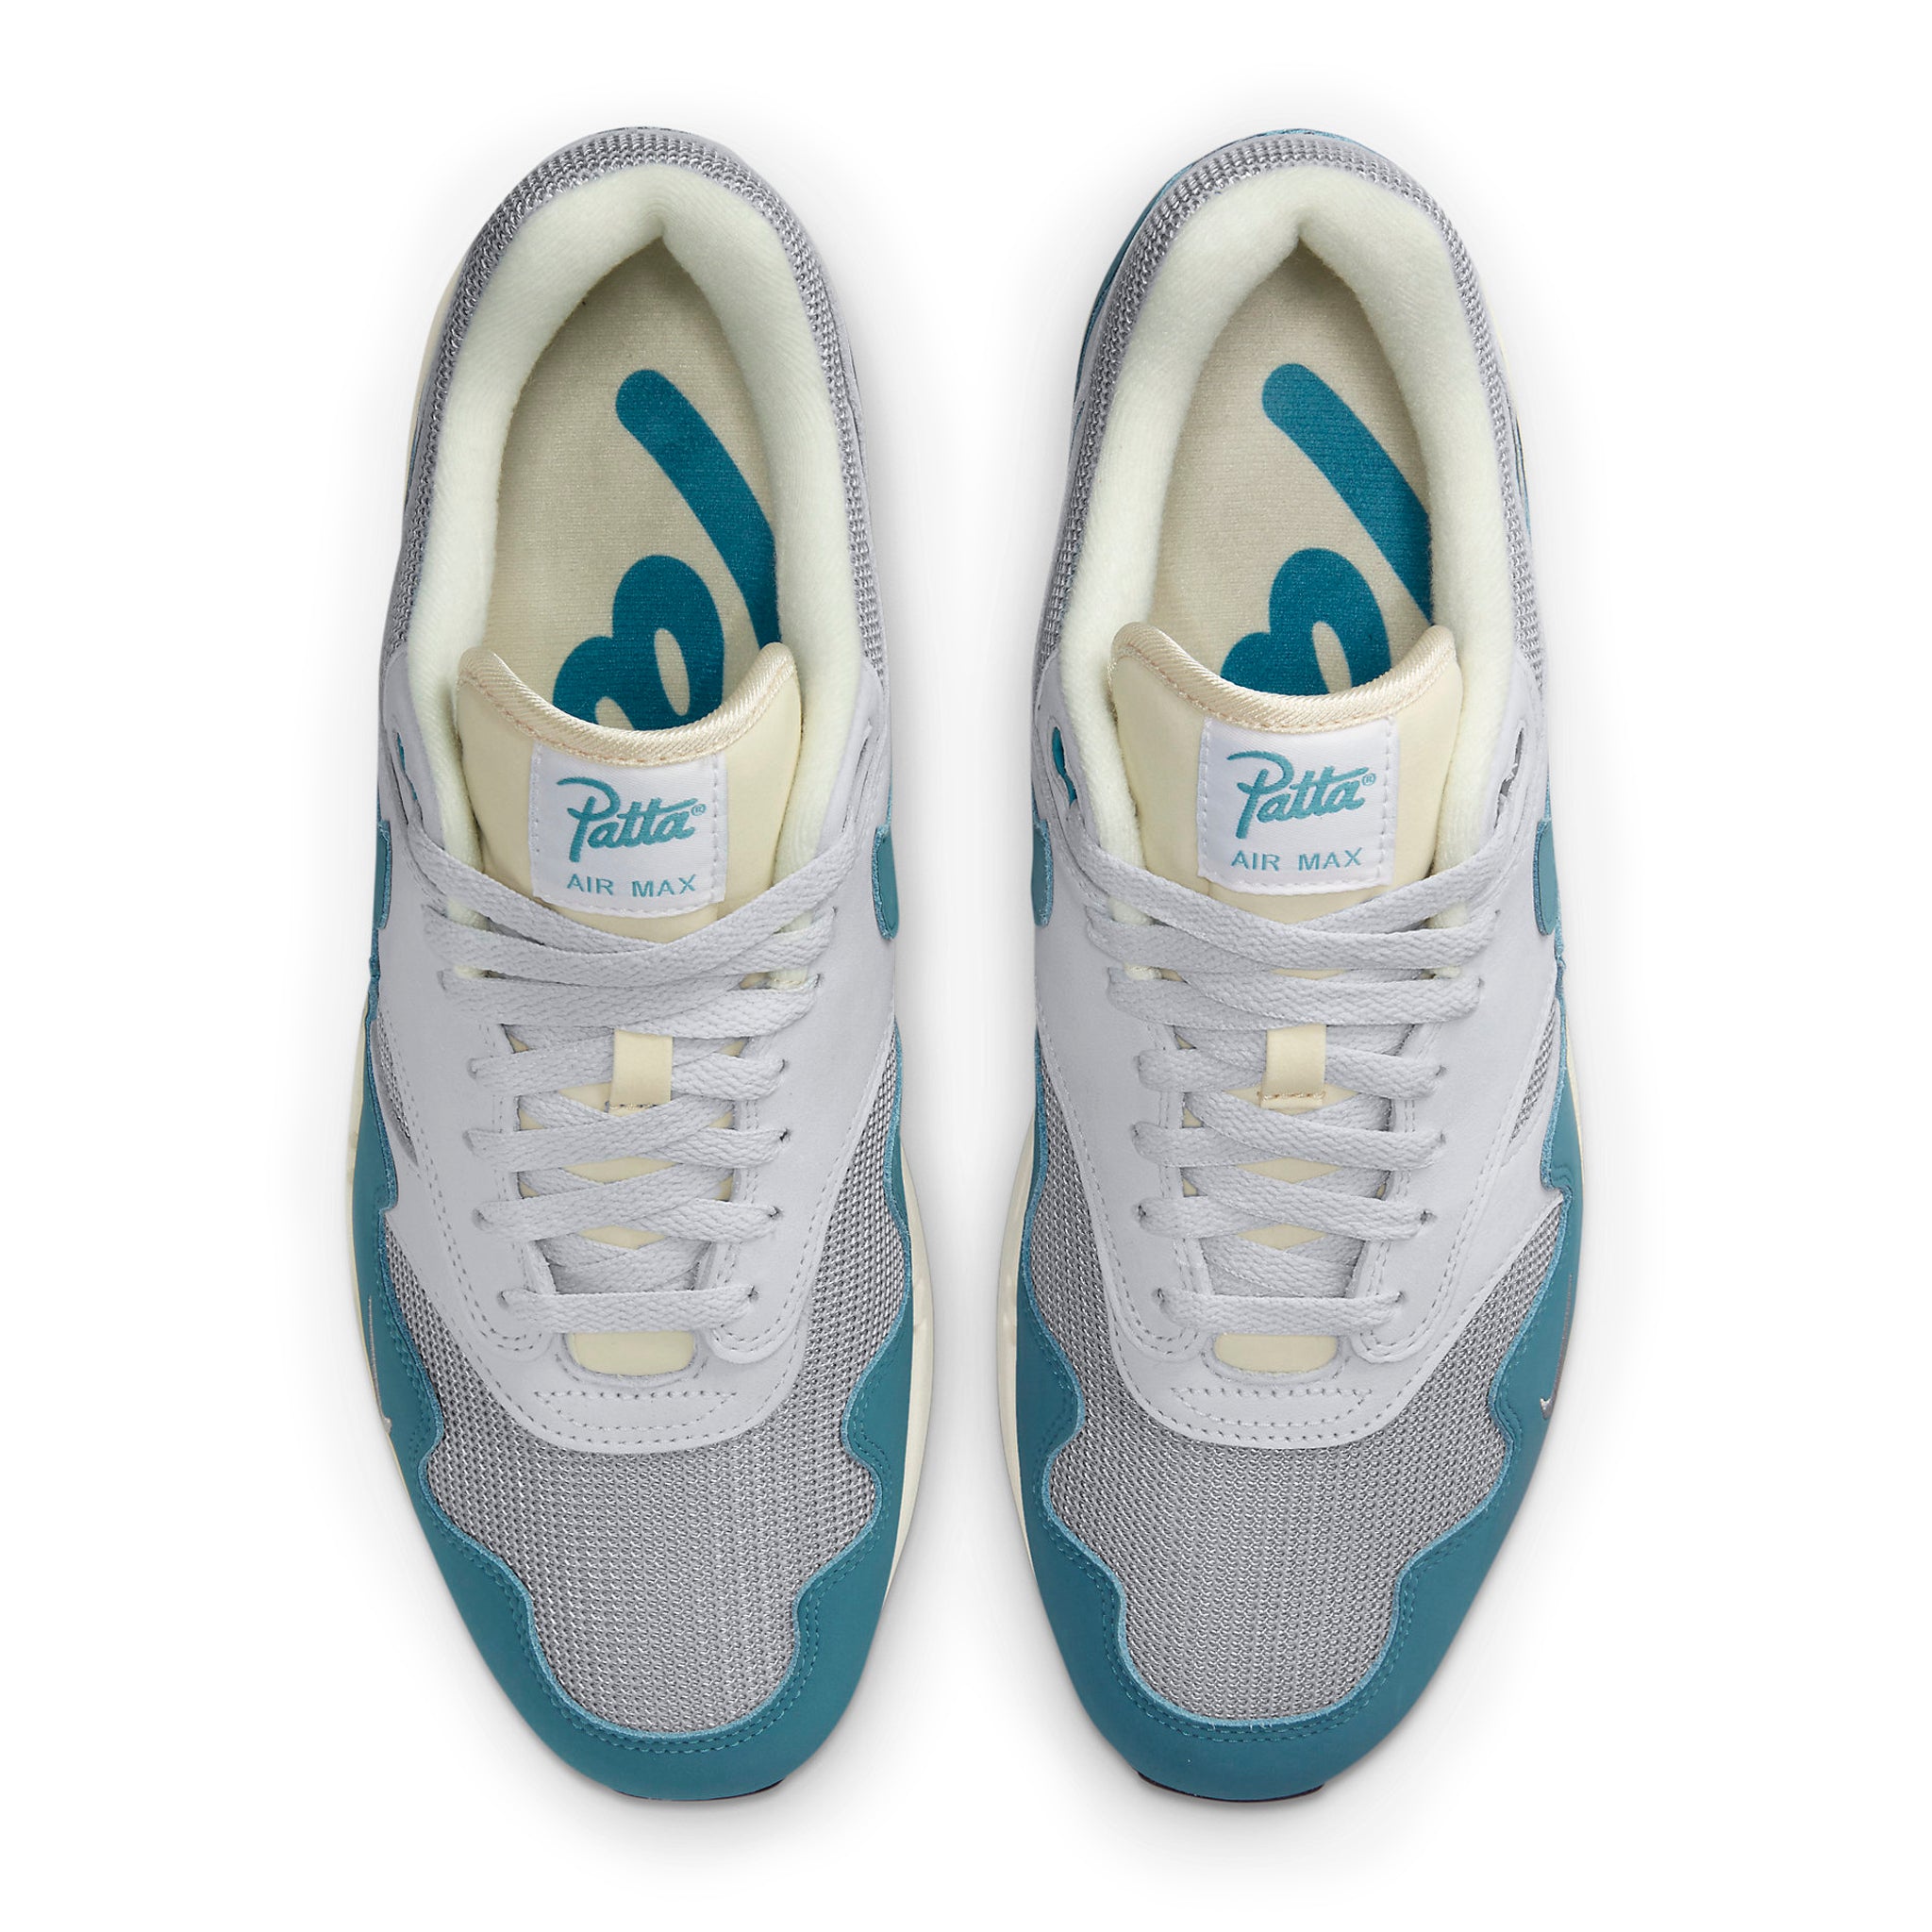 Top down view of Nike Air Max 1 Patta Waves Noise Aqua (With Bracelet) DH1348-004